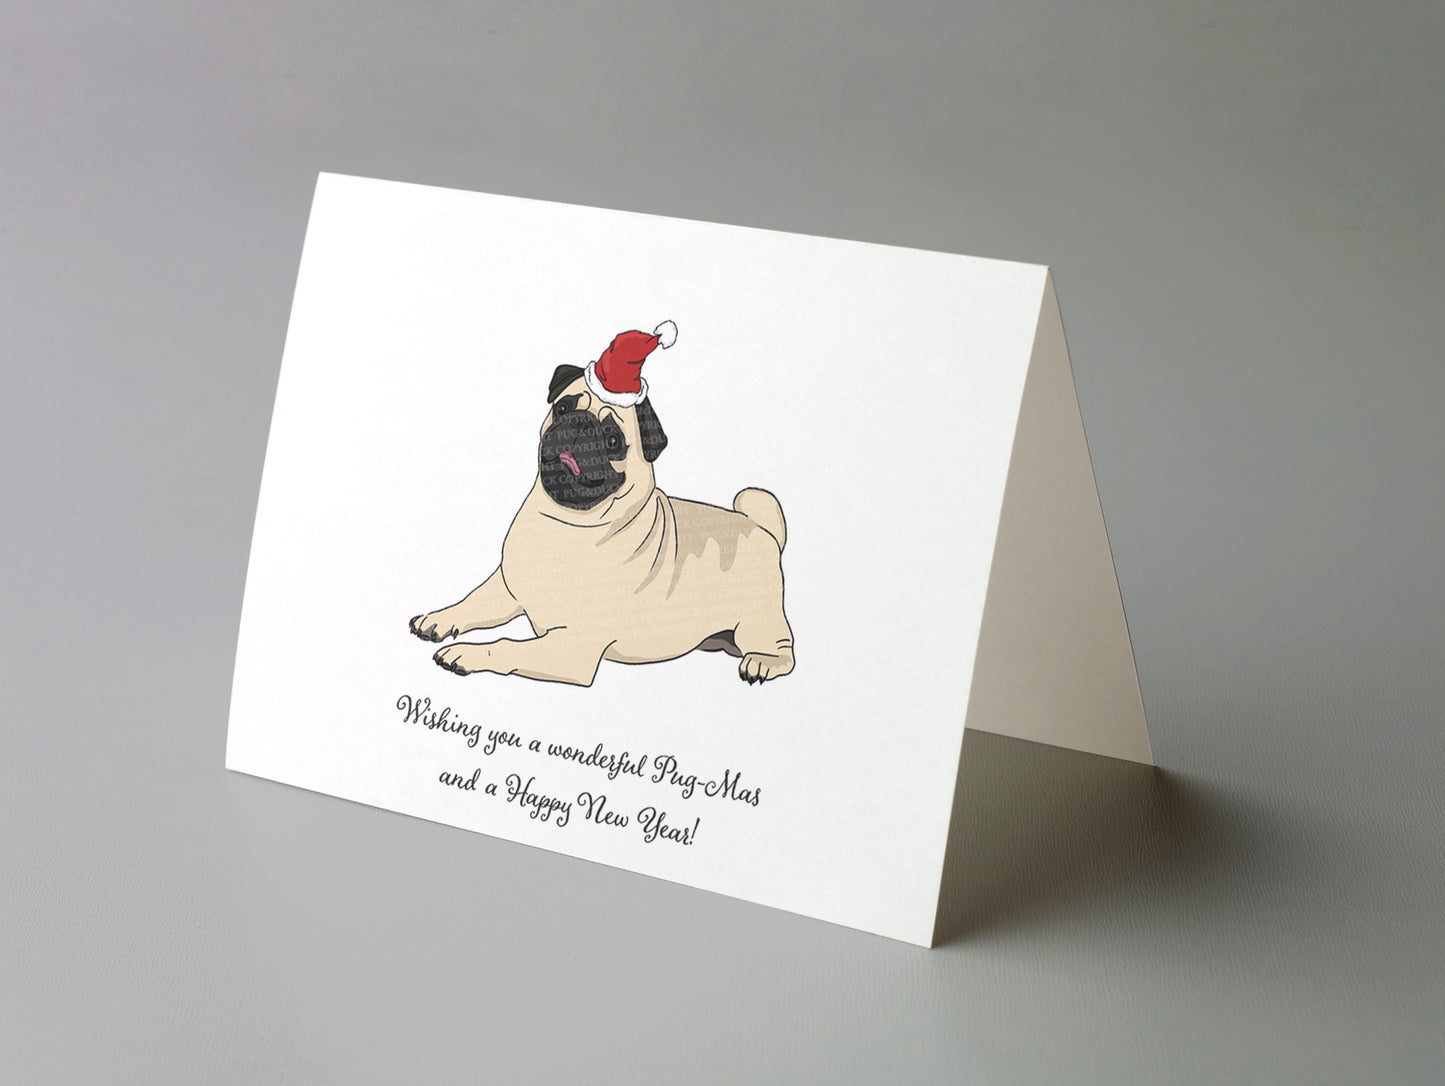 Pug greeting card "Wishing you a wonderful Pug-Mas and a Happy New Year!" with envelope